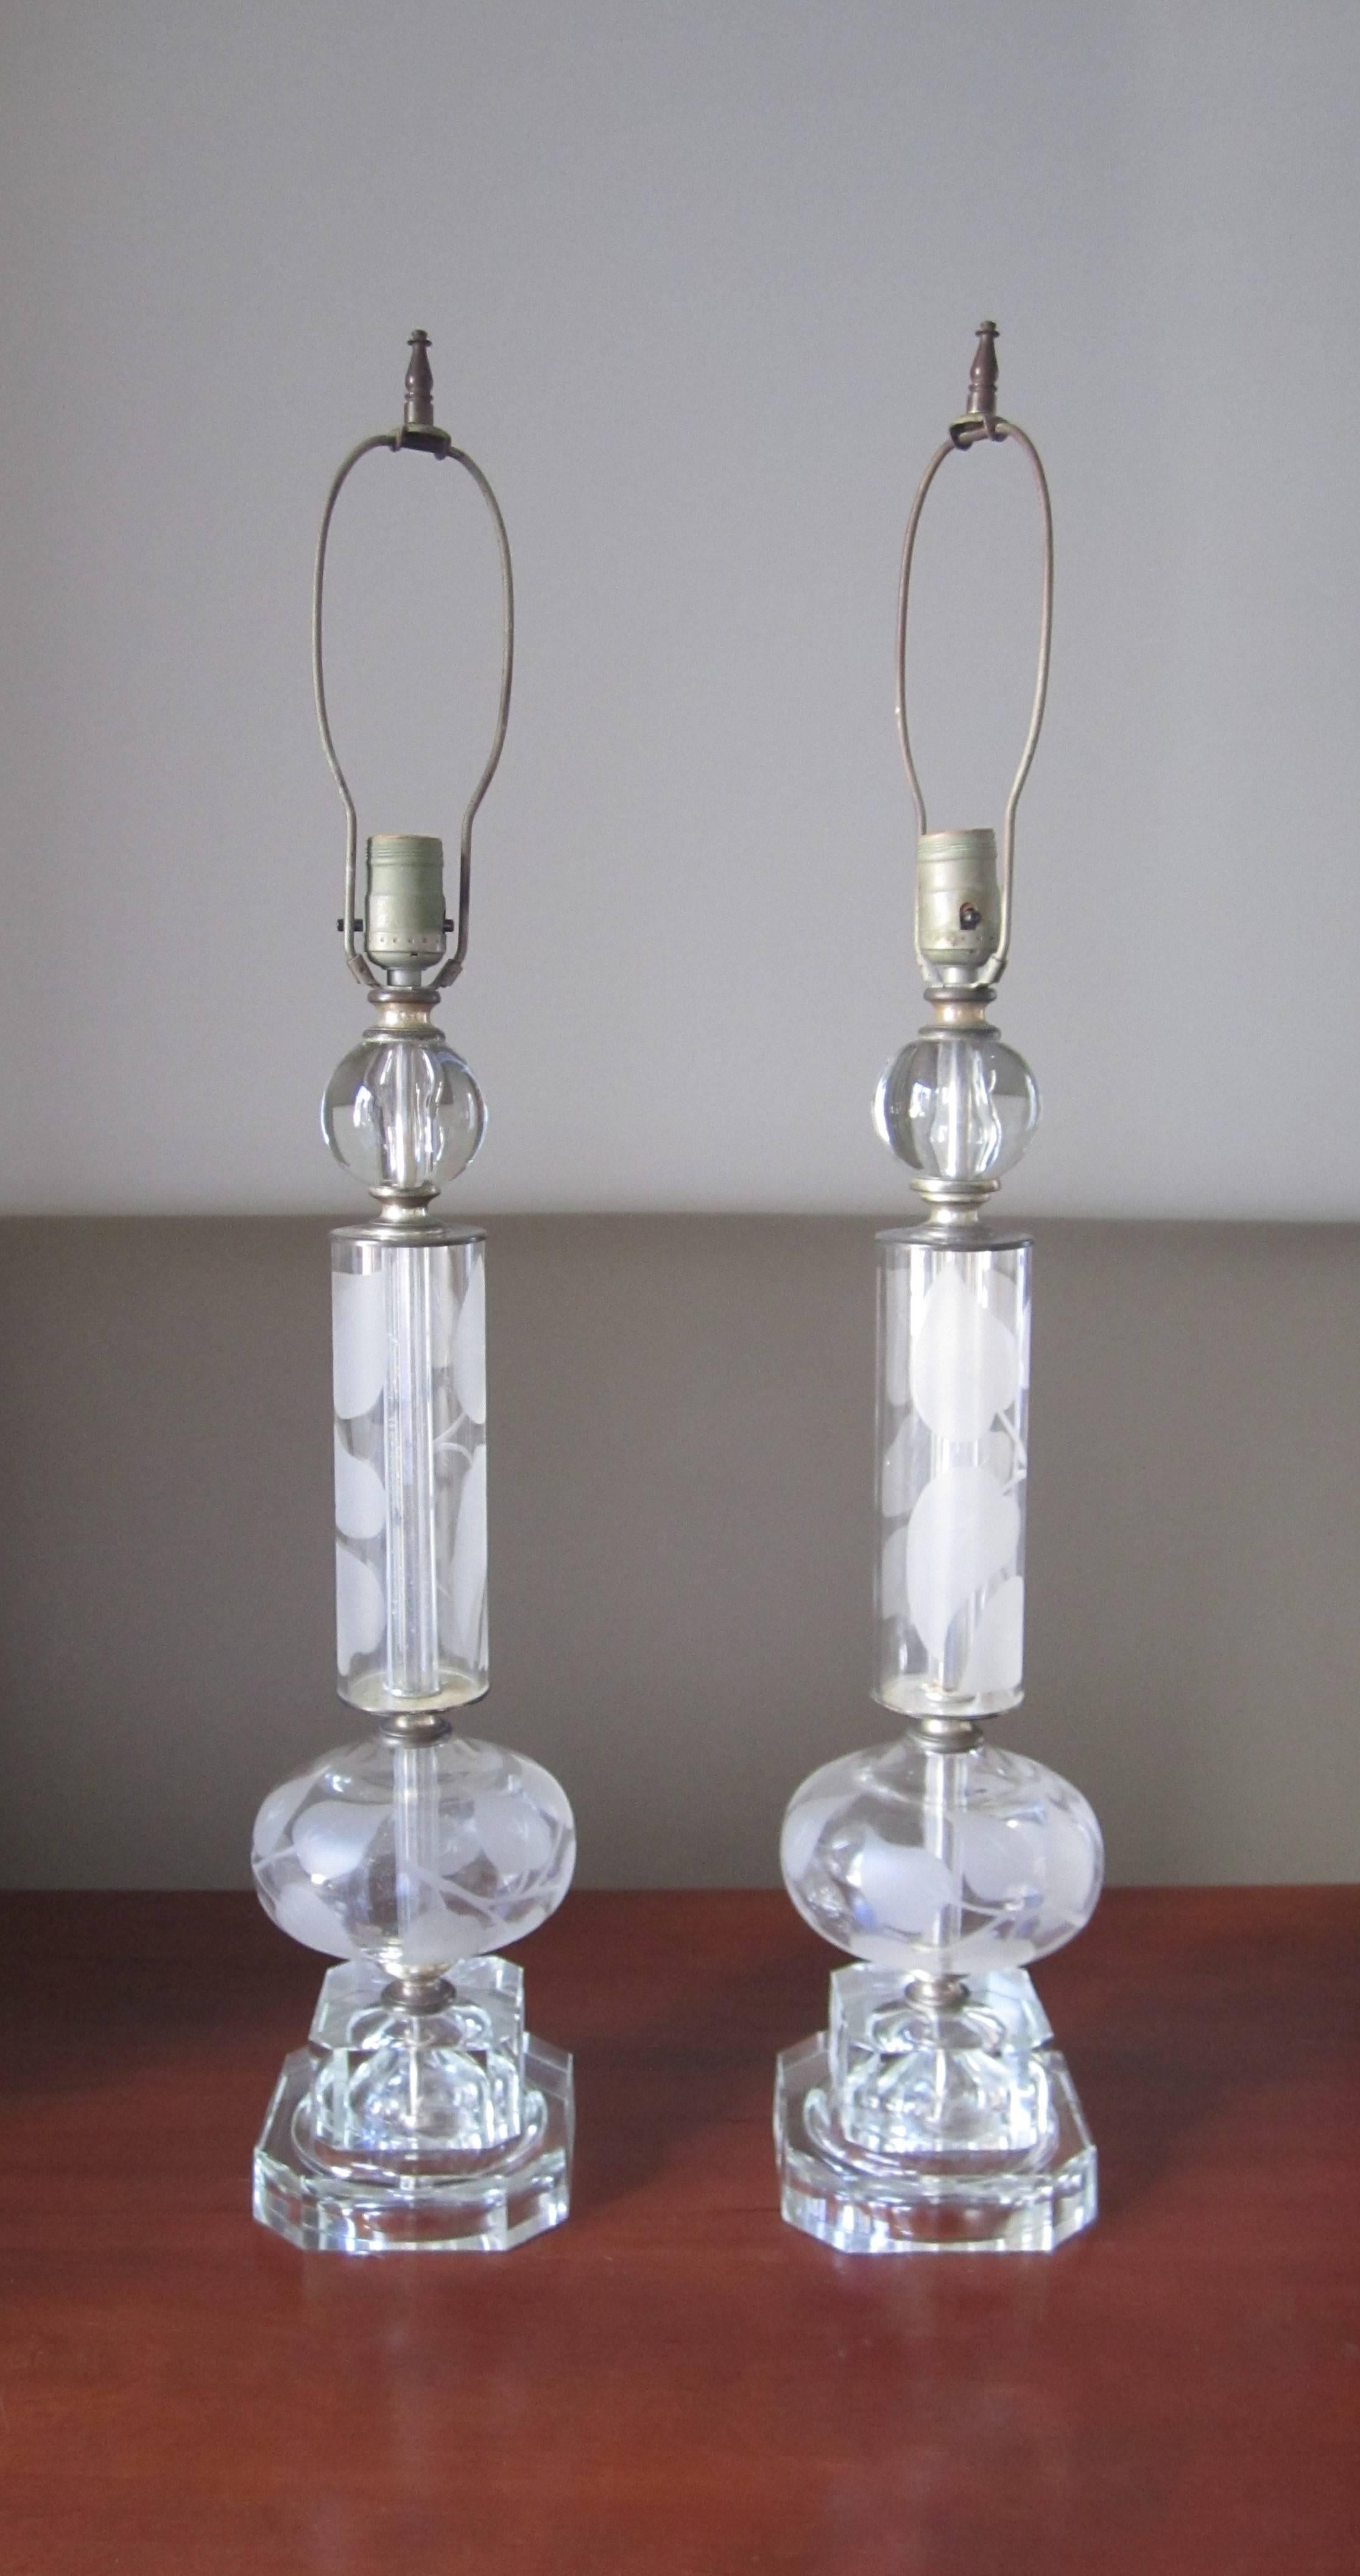 A substantial and very beautiful pair of clear crystal table lamps in the Art Nouveau style, early to mid-20th century, circa 1940s, Europe. Pair have an etched leaf design, crystal ball at top, finished with square bases with tapered corners. Bases